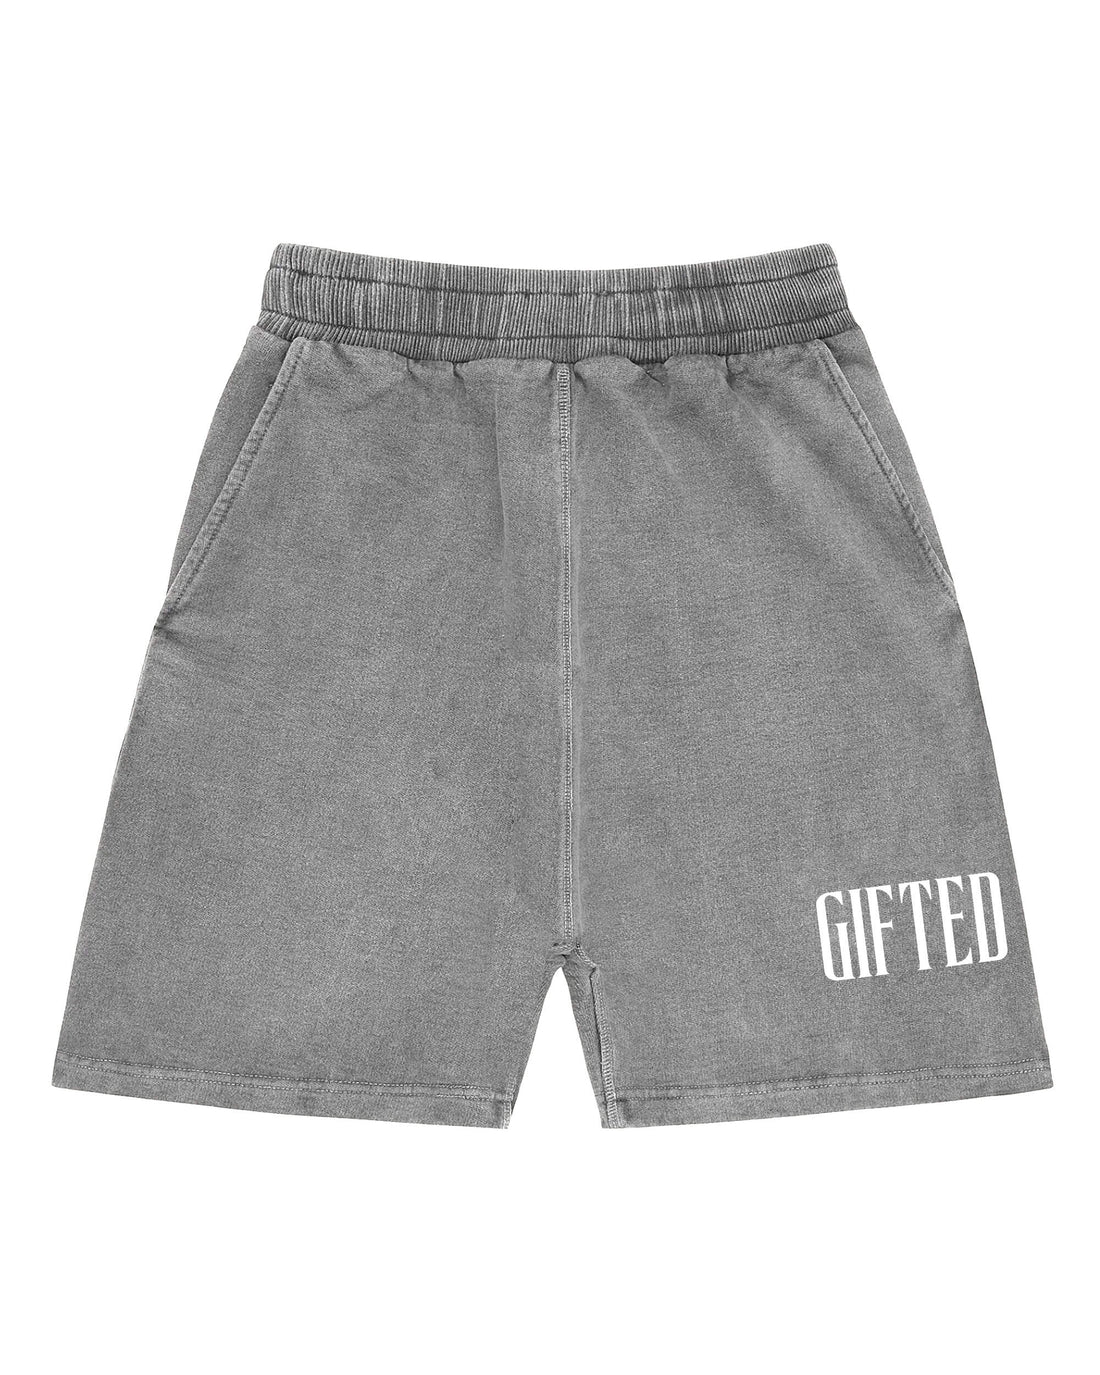 Gifted Shorts - Washed Charcoal